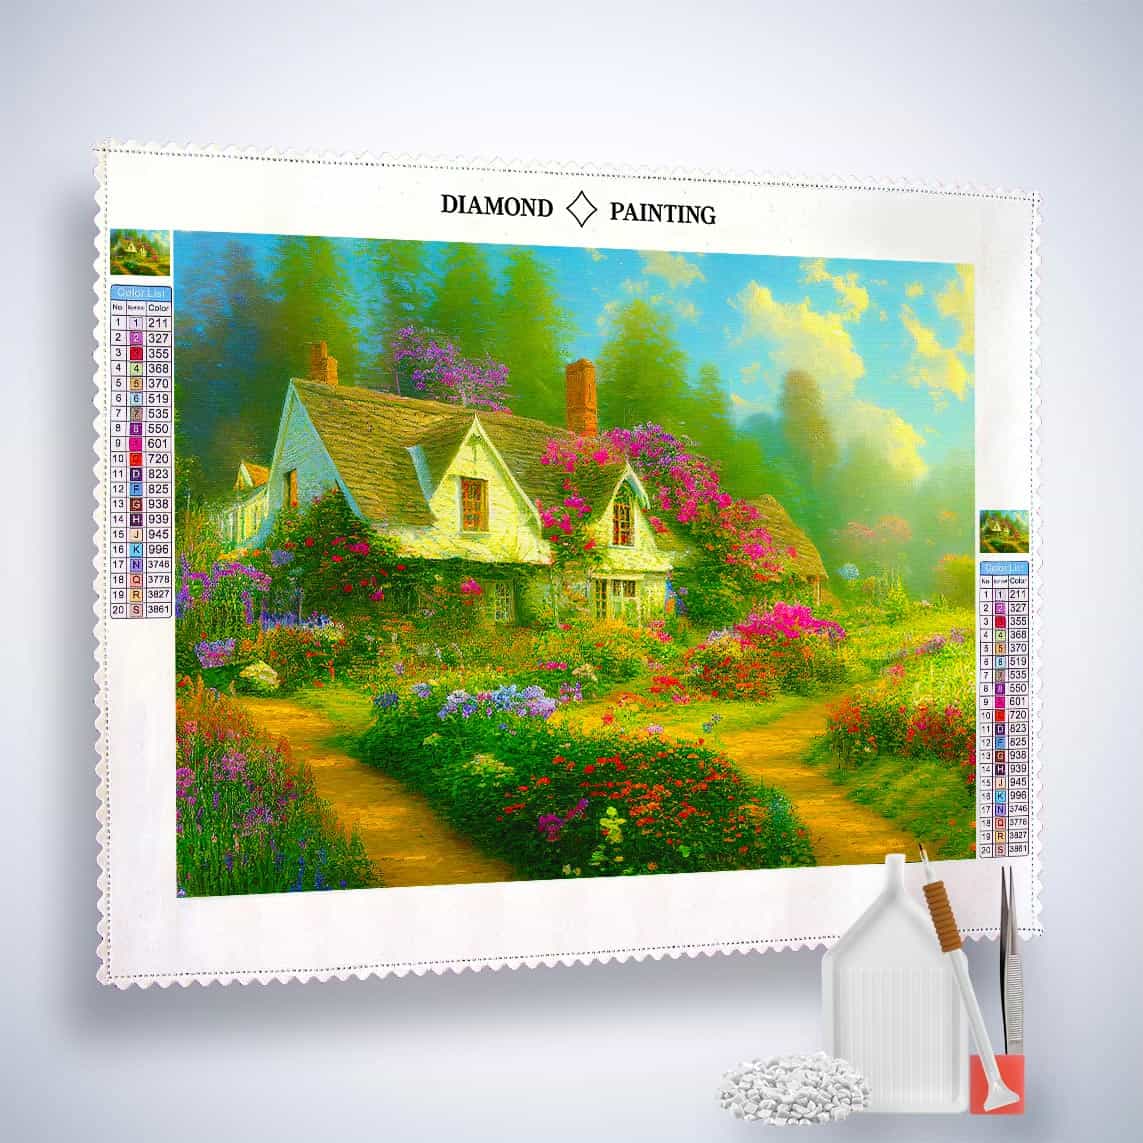 Diamond Painting - Blumiges Waldcottage - gedruckt in Ultra-HD - Horizontal, Natur, Wald